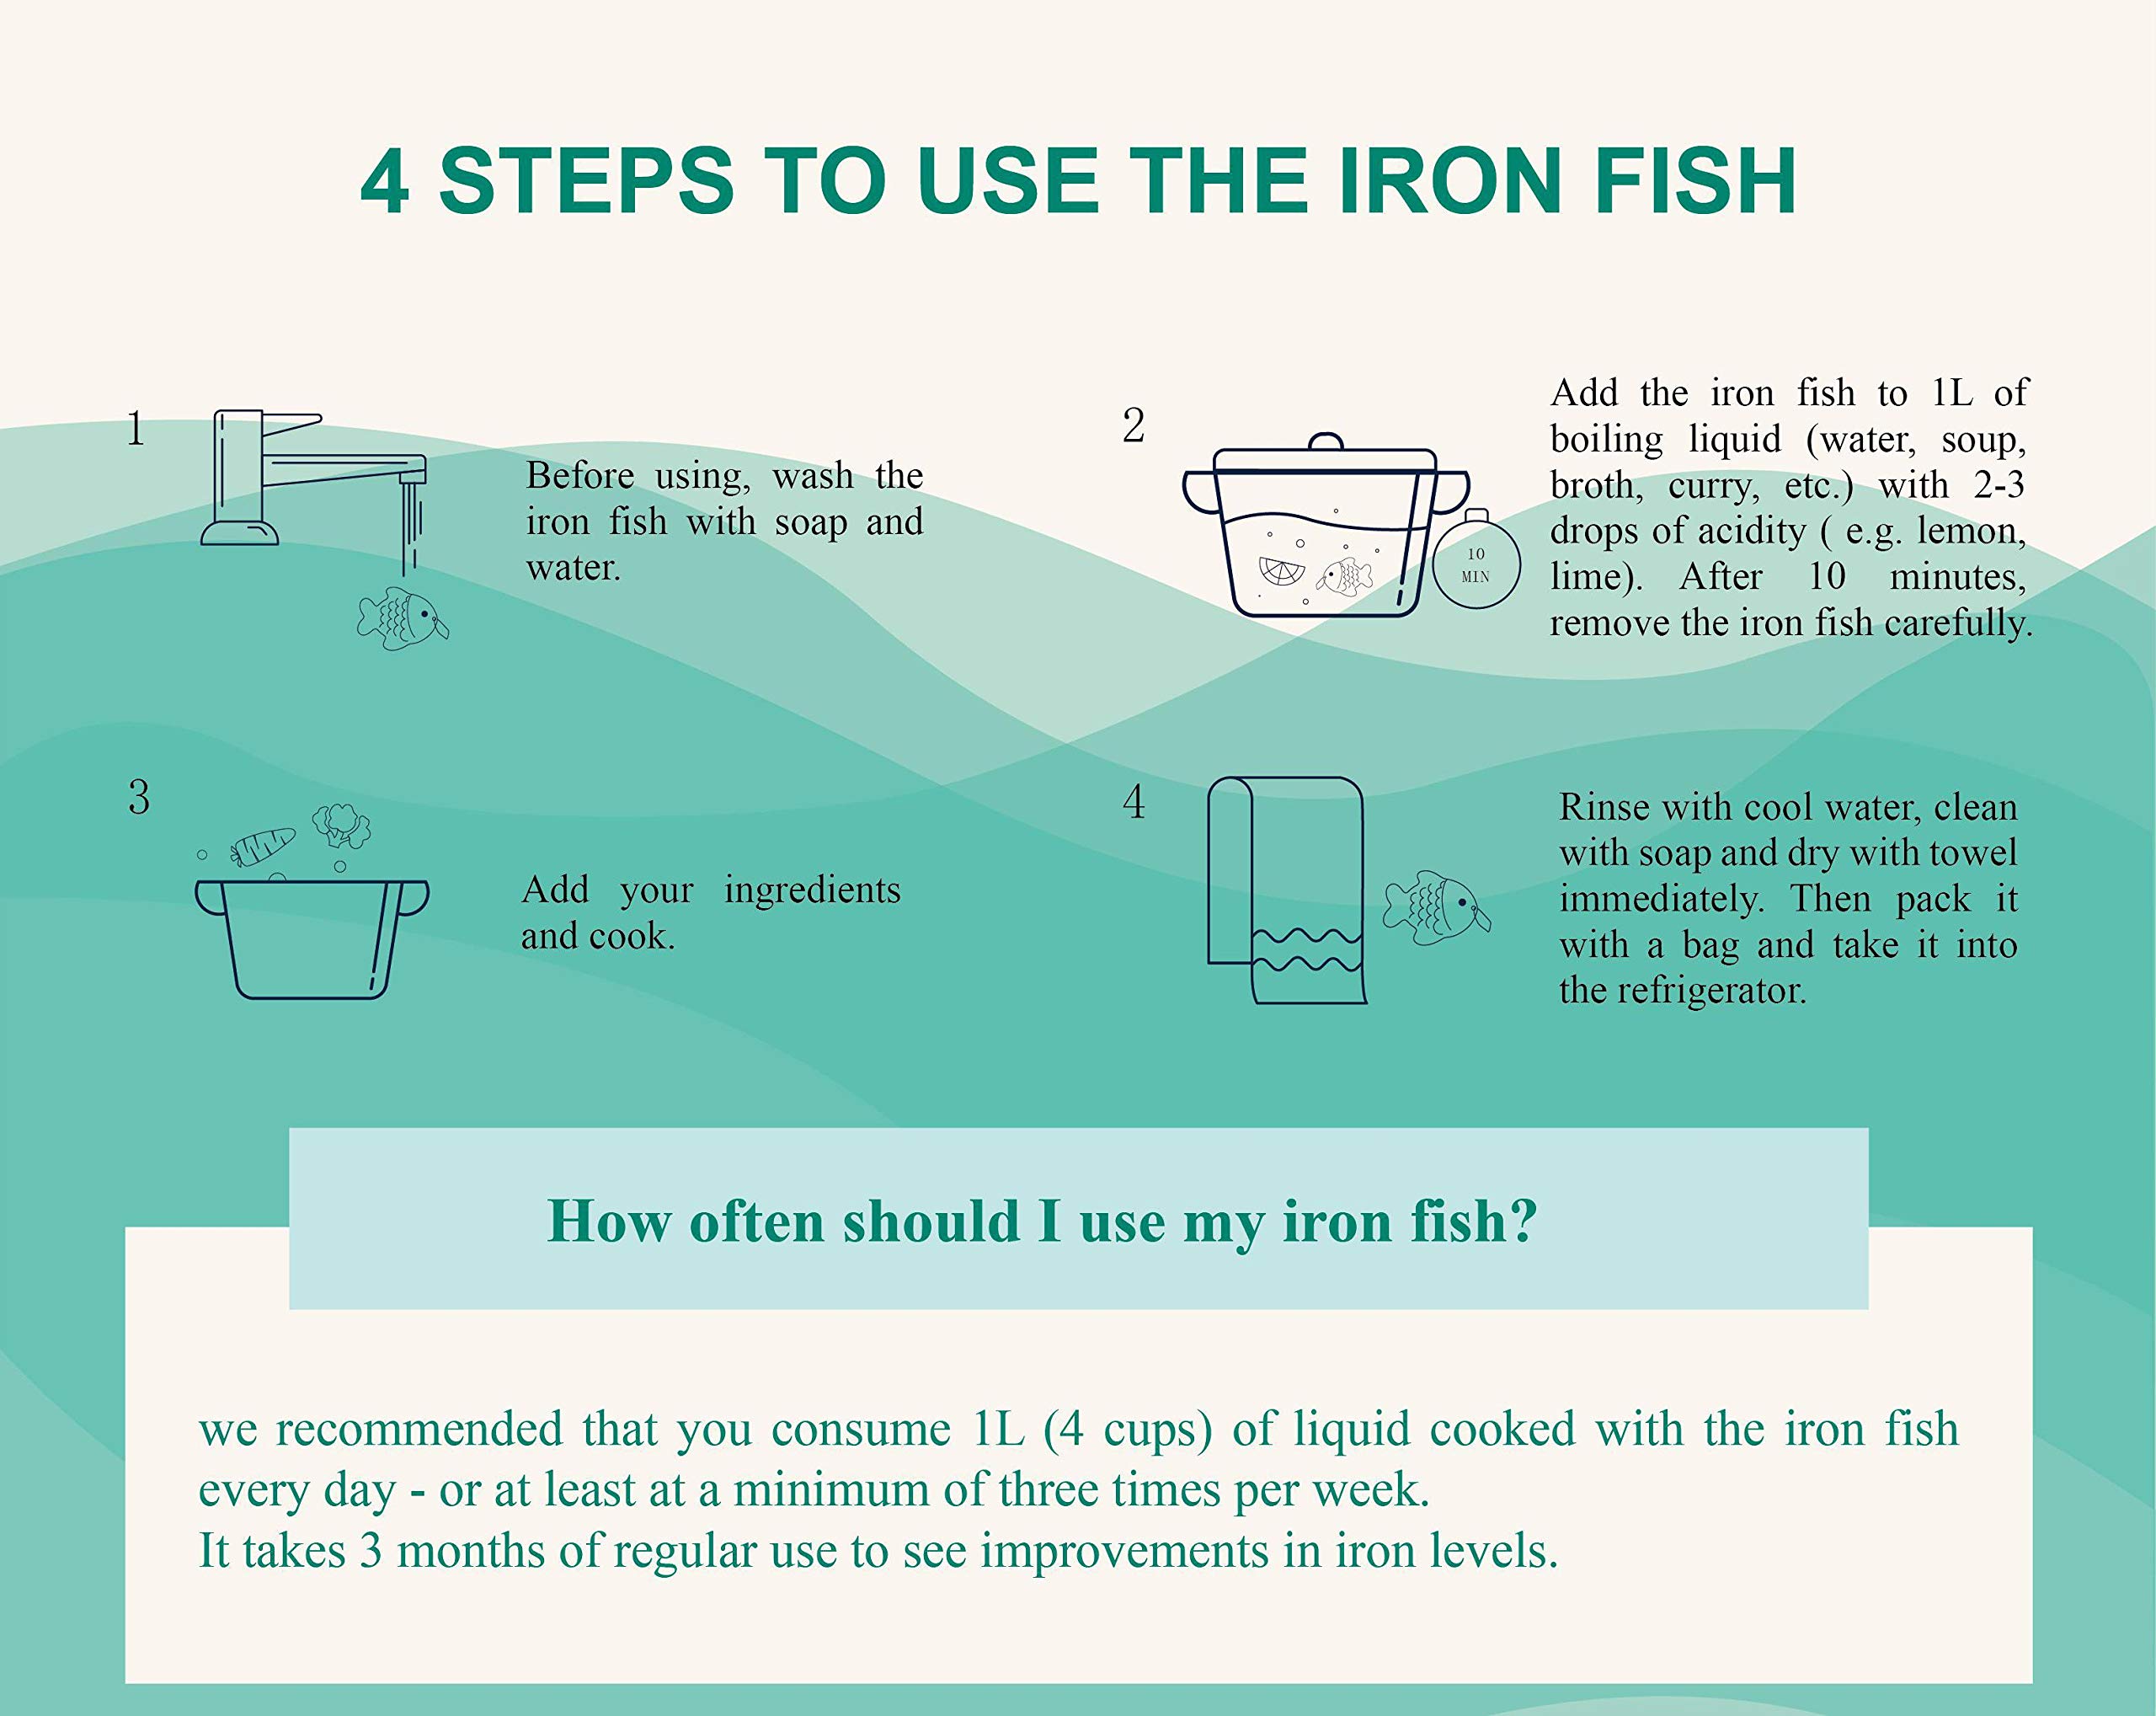 YOUIN 2 Packs of Iron Fish with Bag-A Natural Source of Iron to Reduce The Risk of Iron Deficiency,an Effective and Safe Cooking Tool to Add Iron to Food,Ideal for Pregnant Women Vegans Athletes